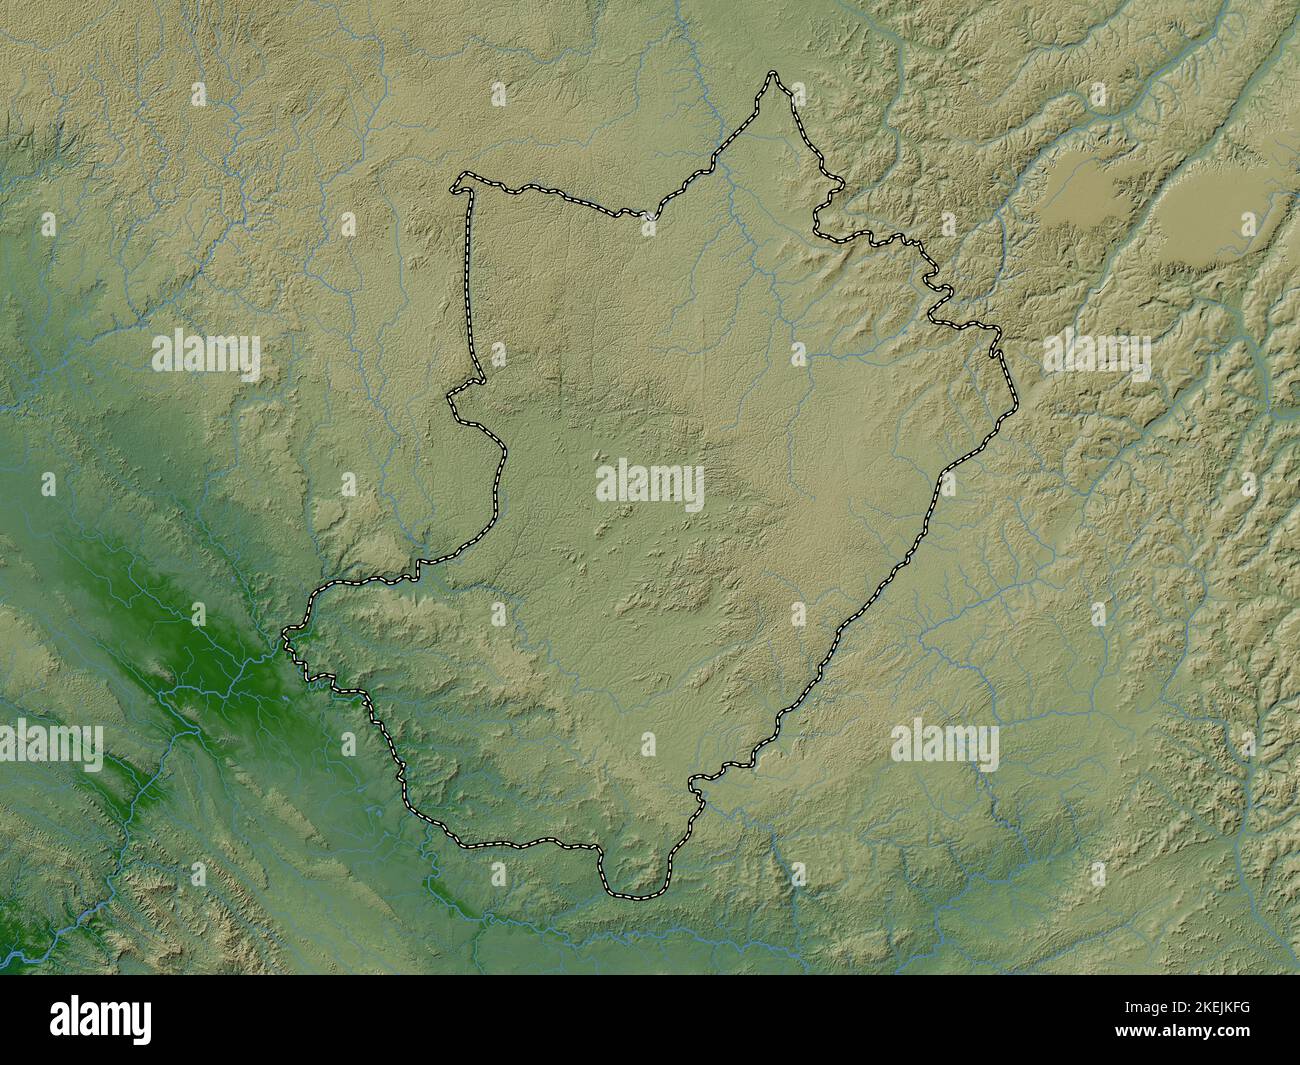 Lekoumou, region of Republic of Congo. Colored elevation map with lakes and rivers Stock Photo